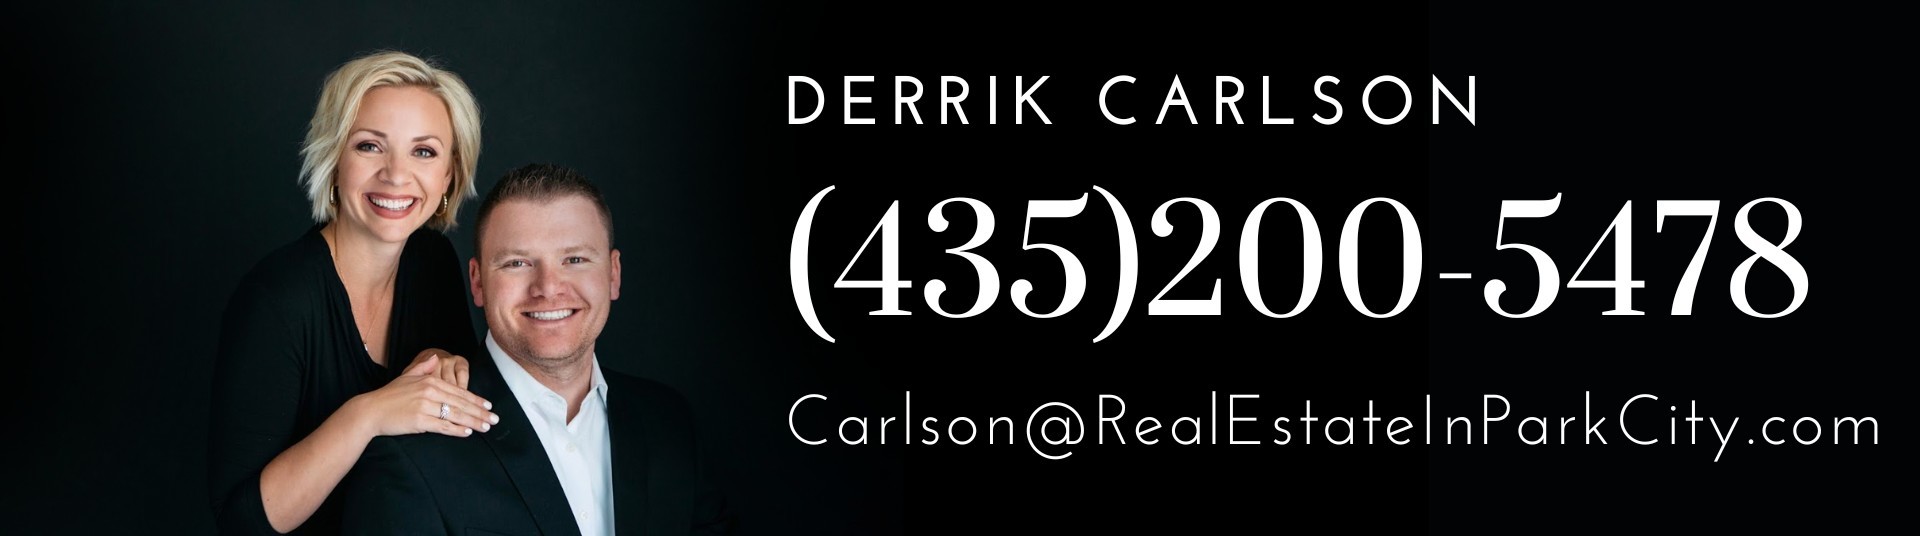 Derrik  Carlson is who called from 435-200-5478